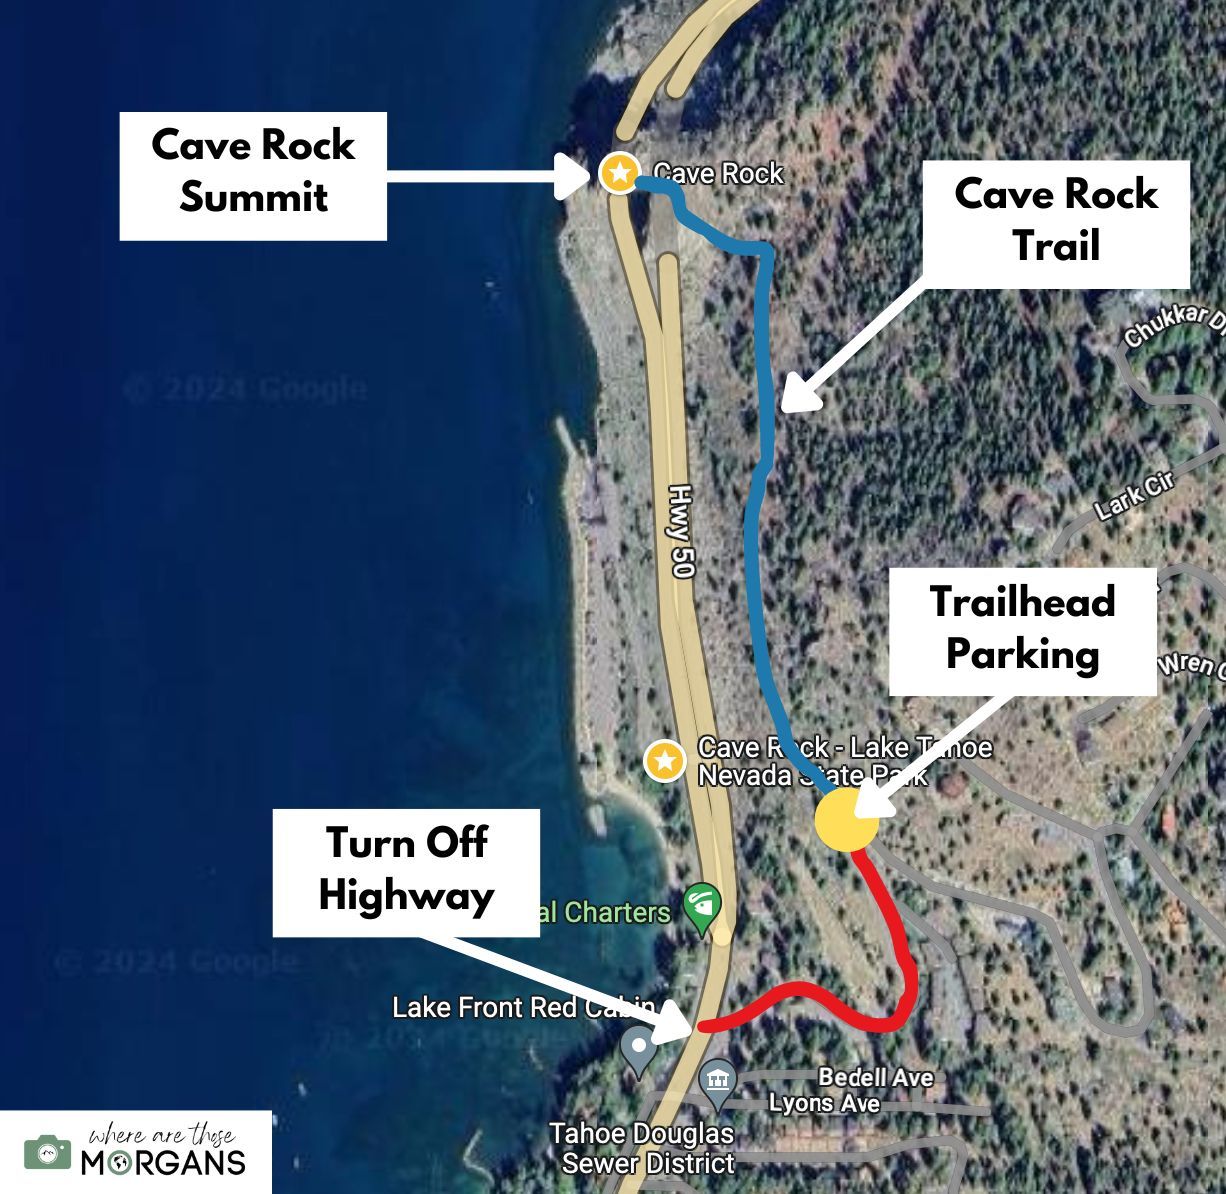 Route map for hiking Cave Rock Trail in Lake Tahoe with parking, roads and trail directions from a Google Maps birds eye view screenshot